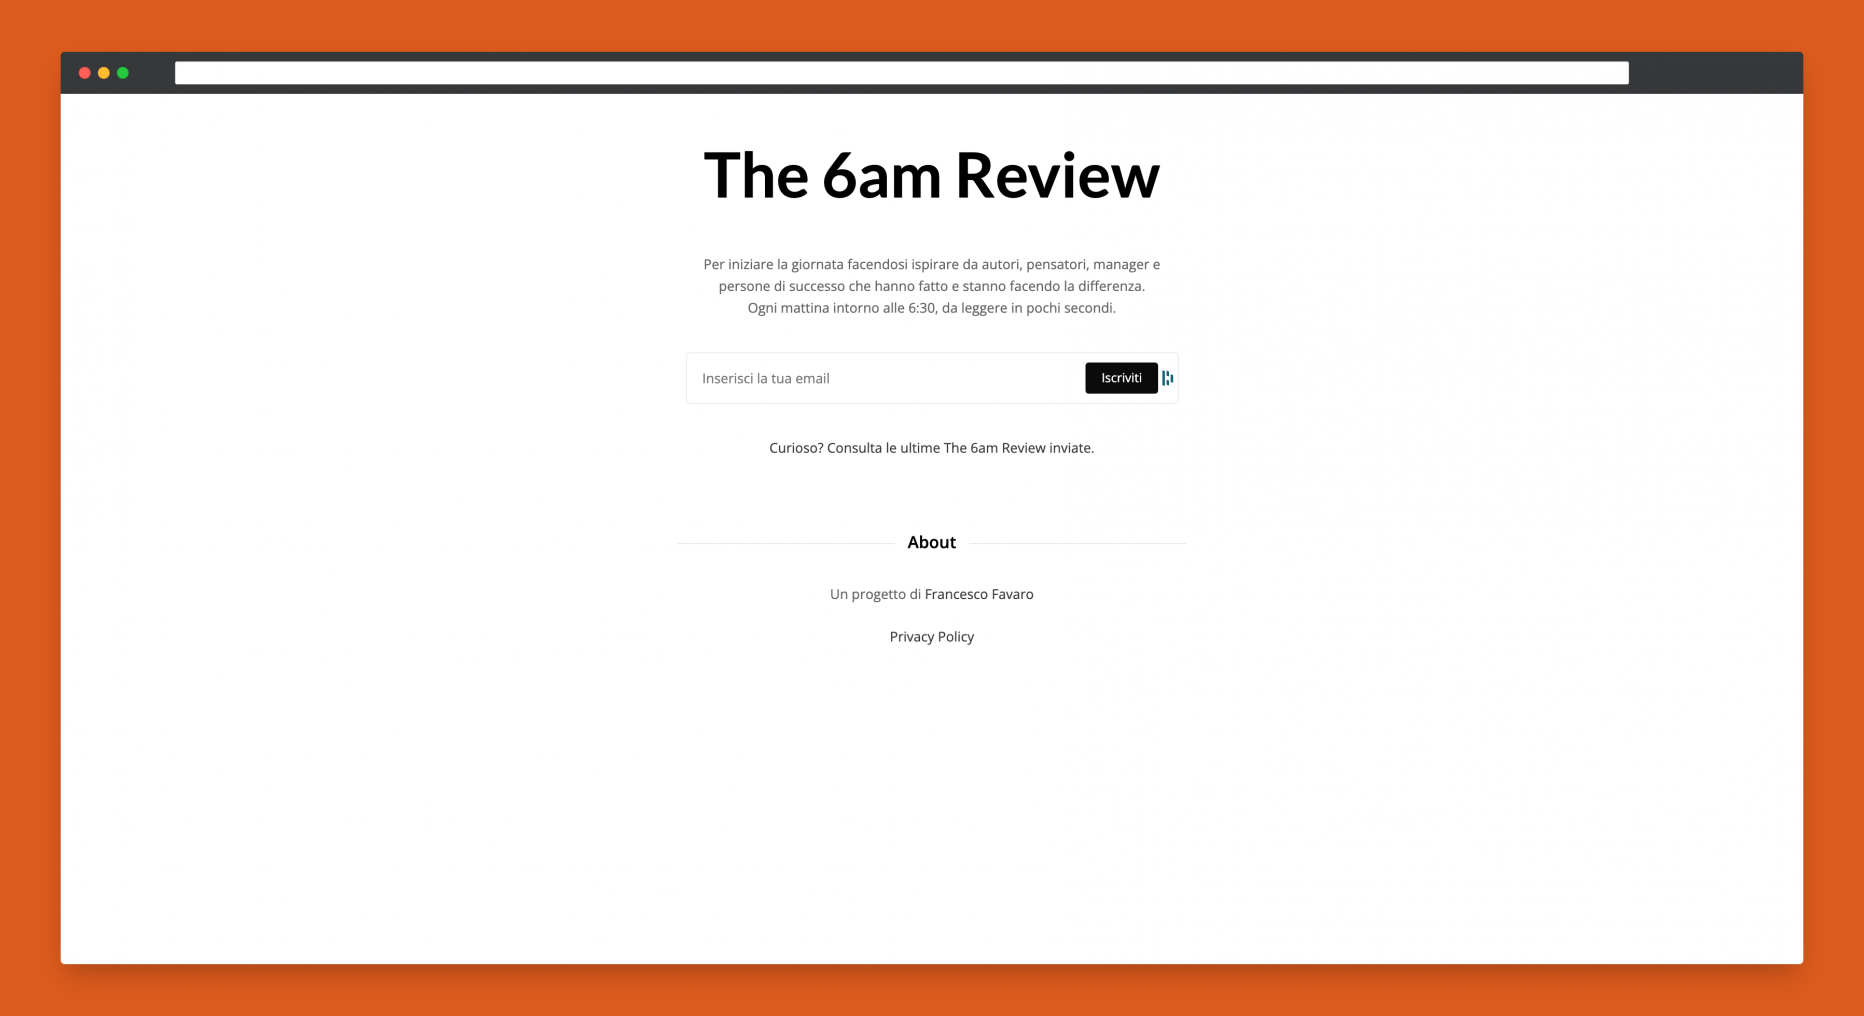 The 6am Review